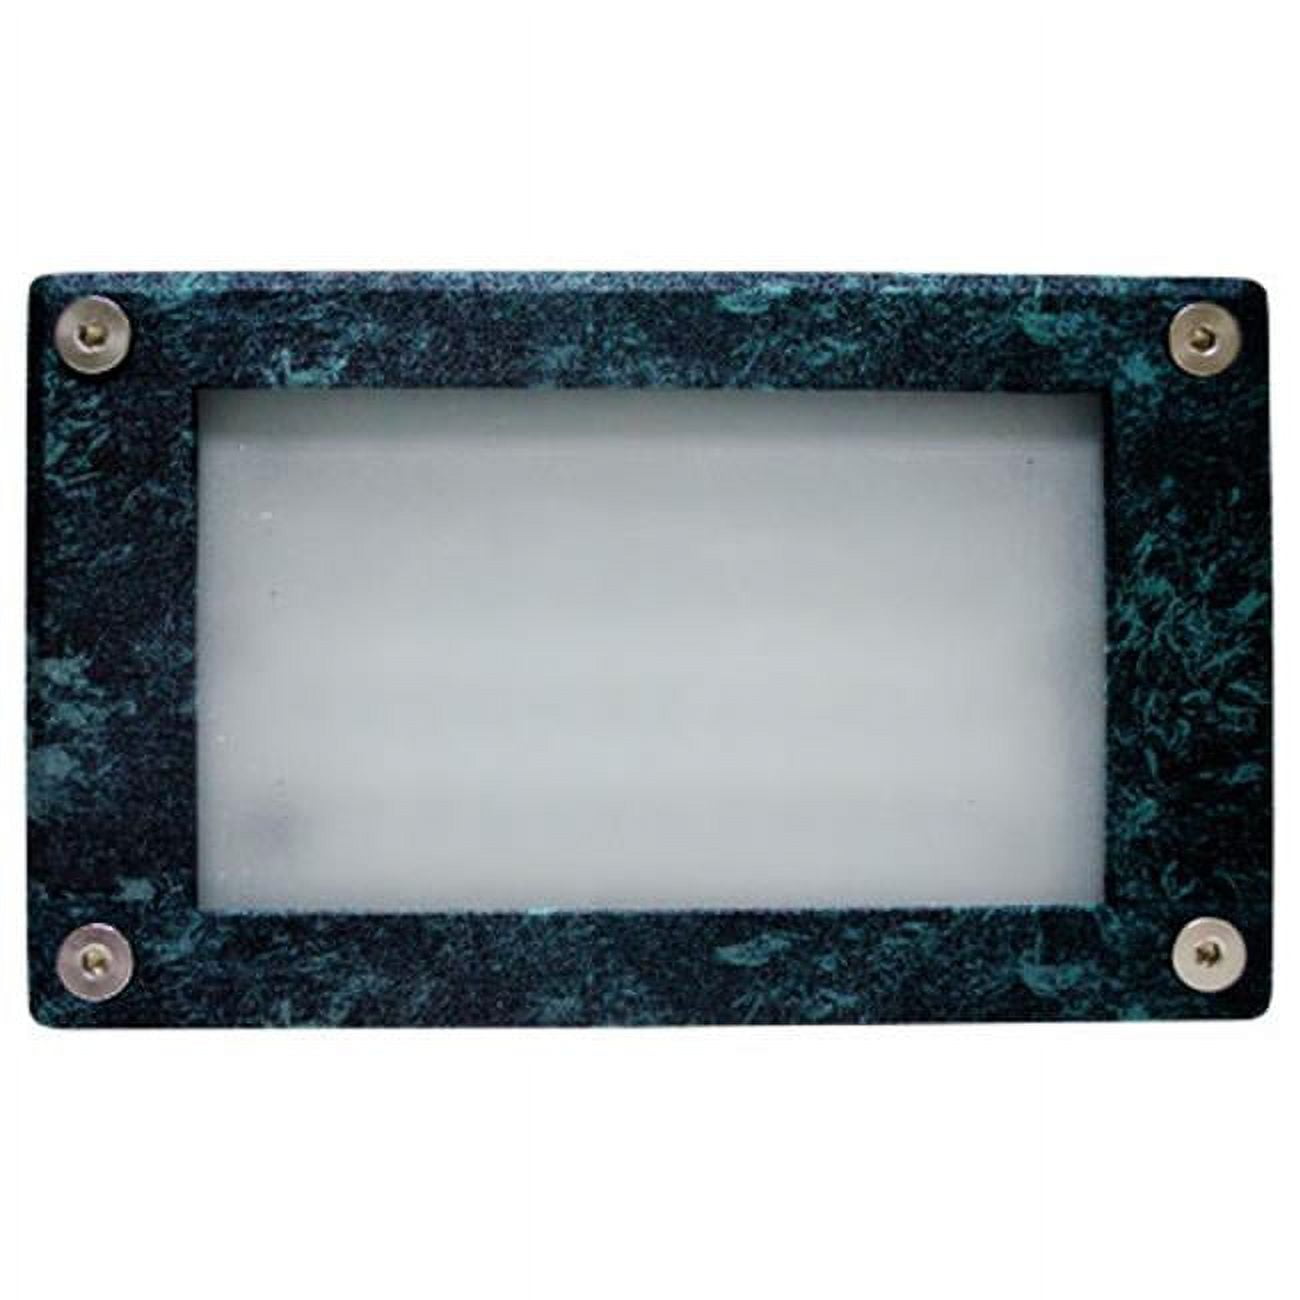 Picture of Dabmar Lighting LV650-VG Cast Aluminum Recessed Open Face Brick, Step & Wall Light, Verde Green - 3.88 x 6.44 x 2.63 in.